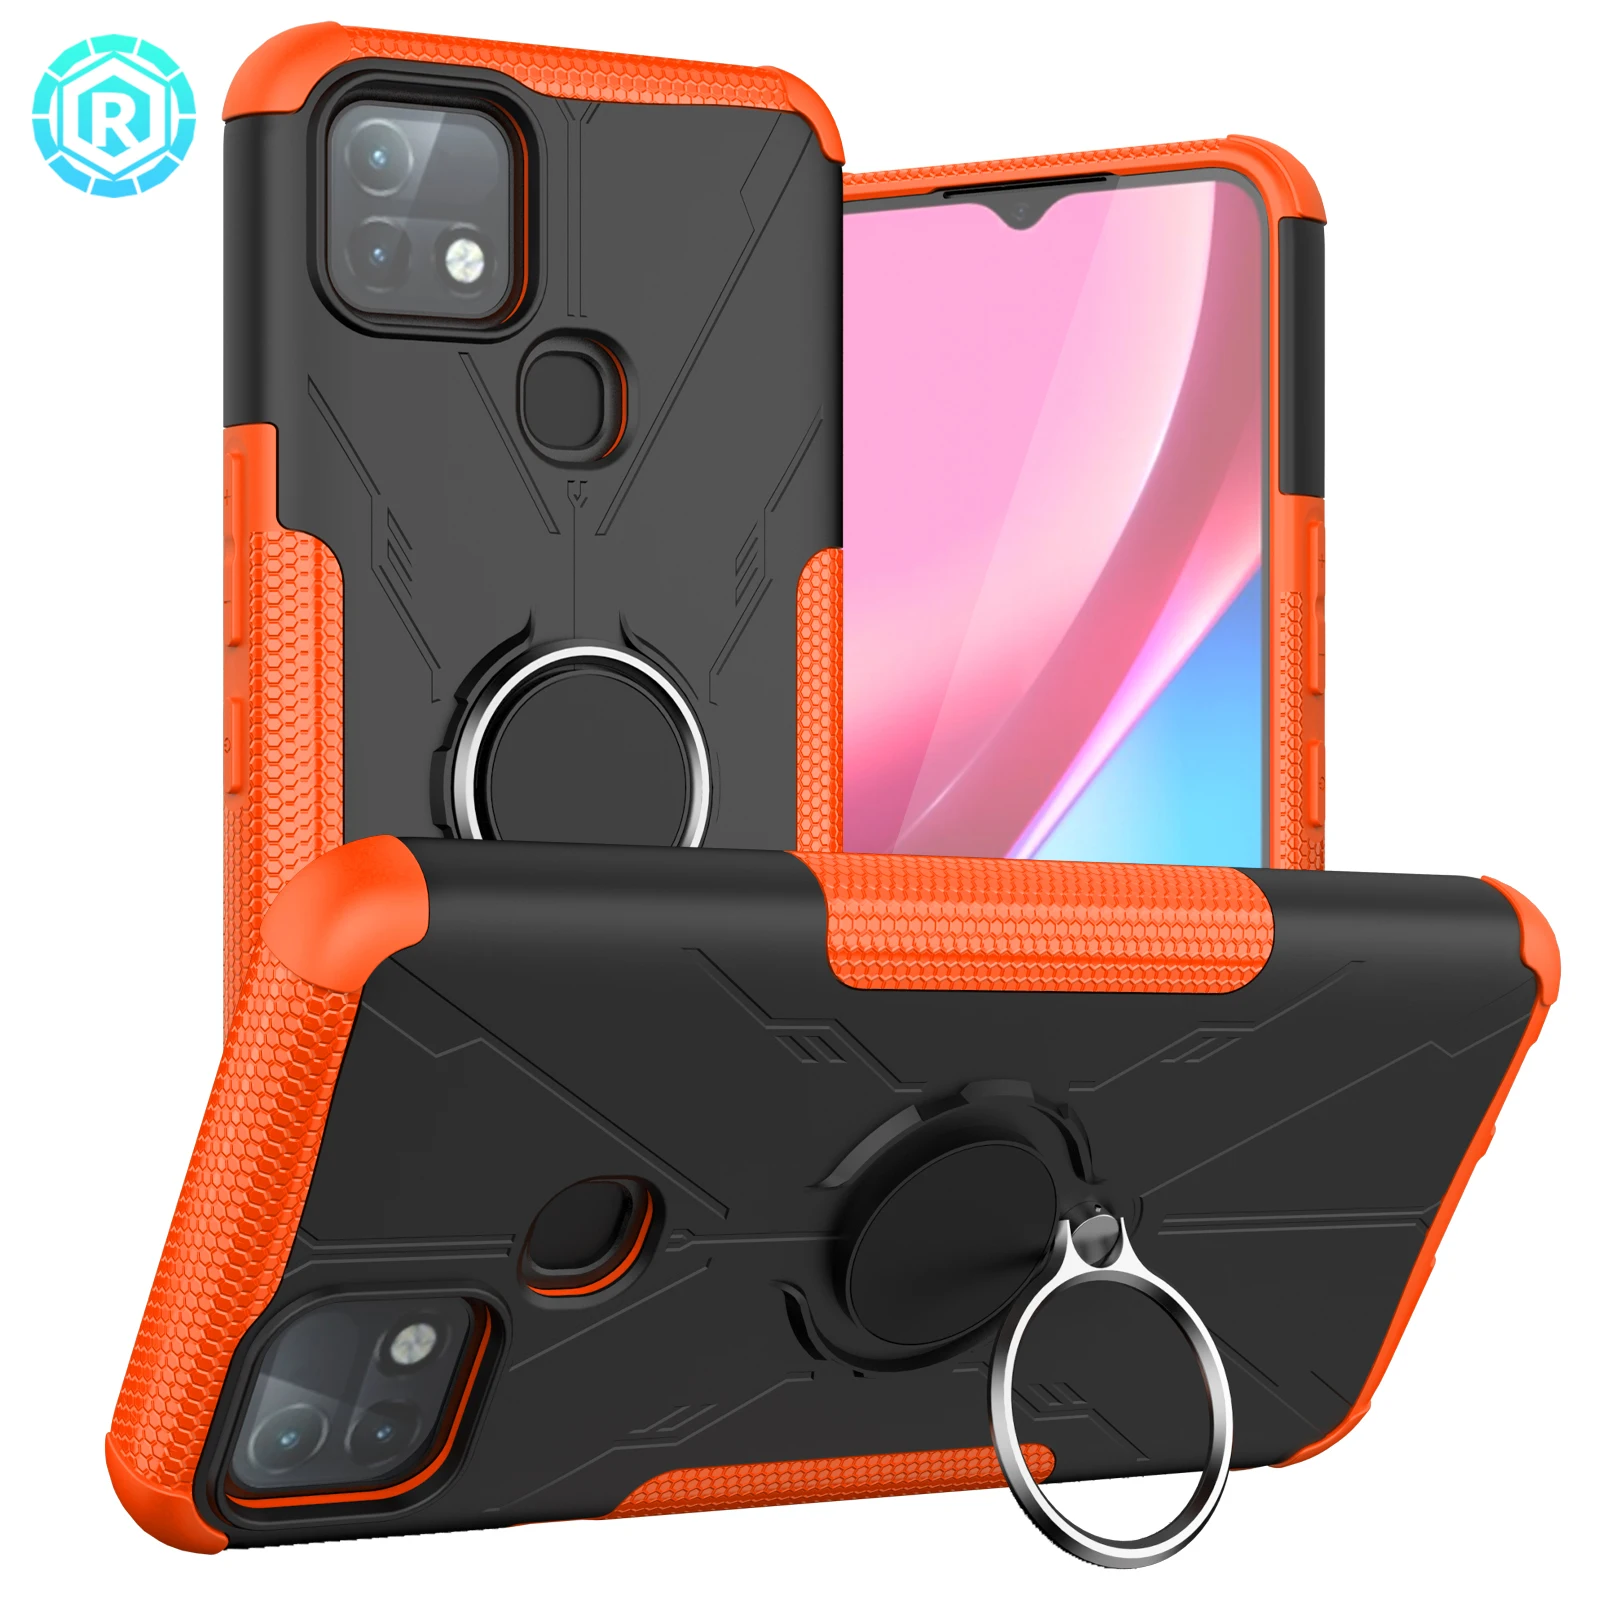 infinix new model mobile Capa for Infinix Hot 10i Case for Infinix Hot 10 Play Lite 10T 10S NFC Armor Case for Infinix Note 10 Pro 8 Smart HD 2021 Case latest infinix android phone